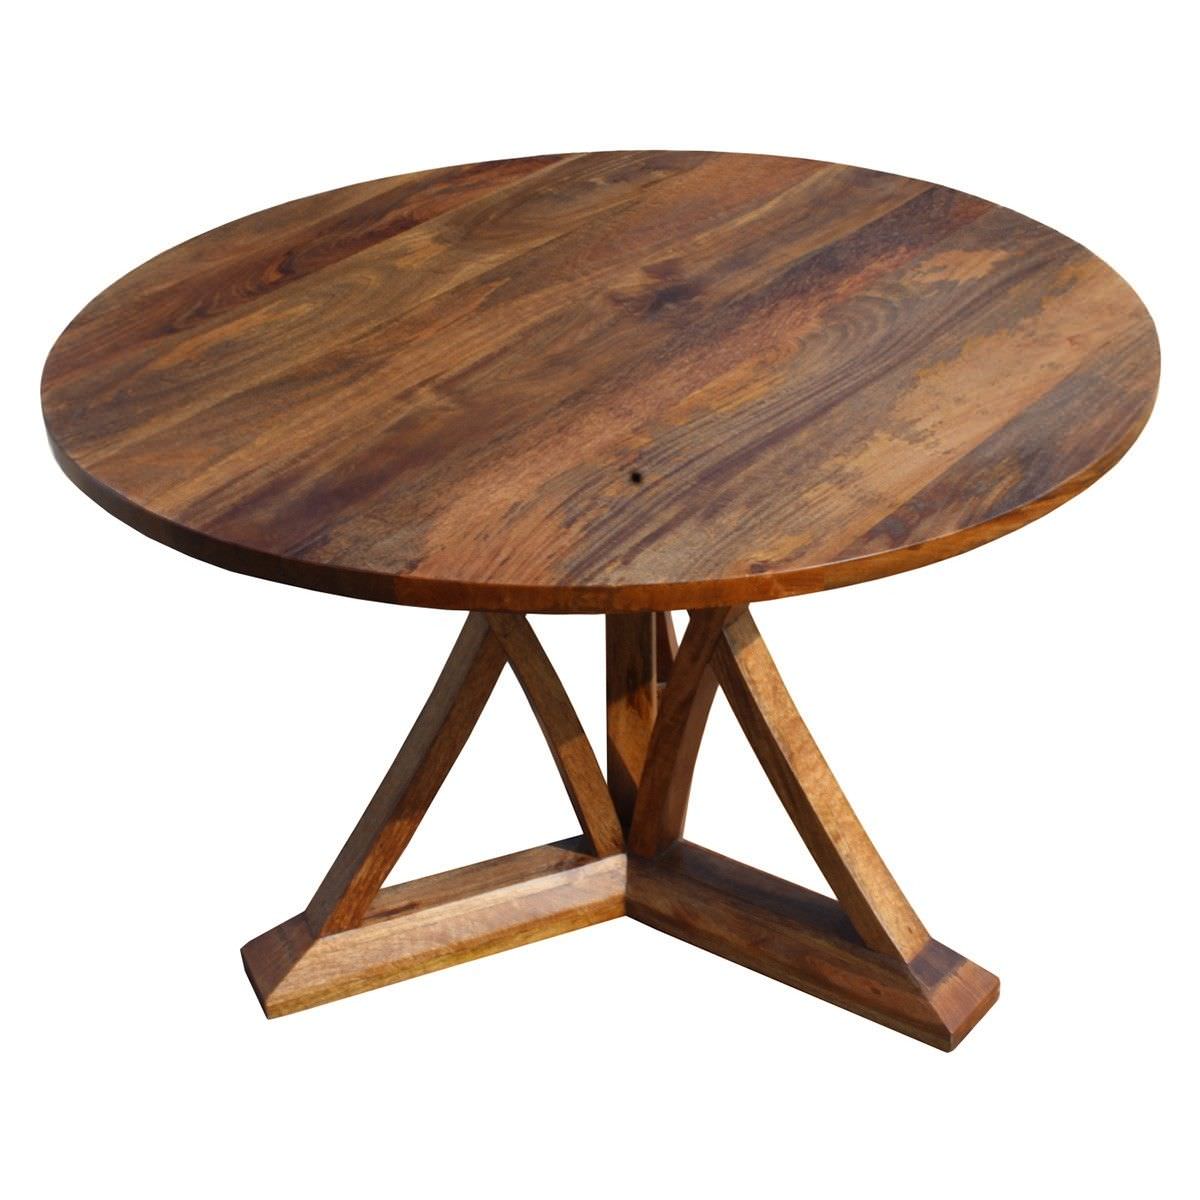 Merle Mango Wood Round Dining Table, 120cm, Natural